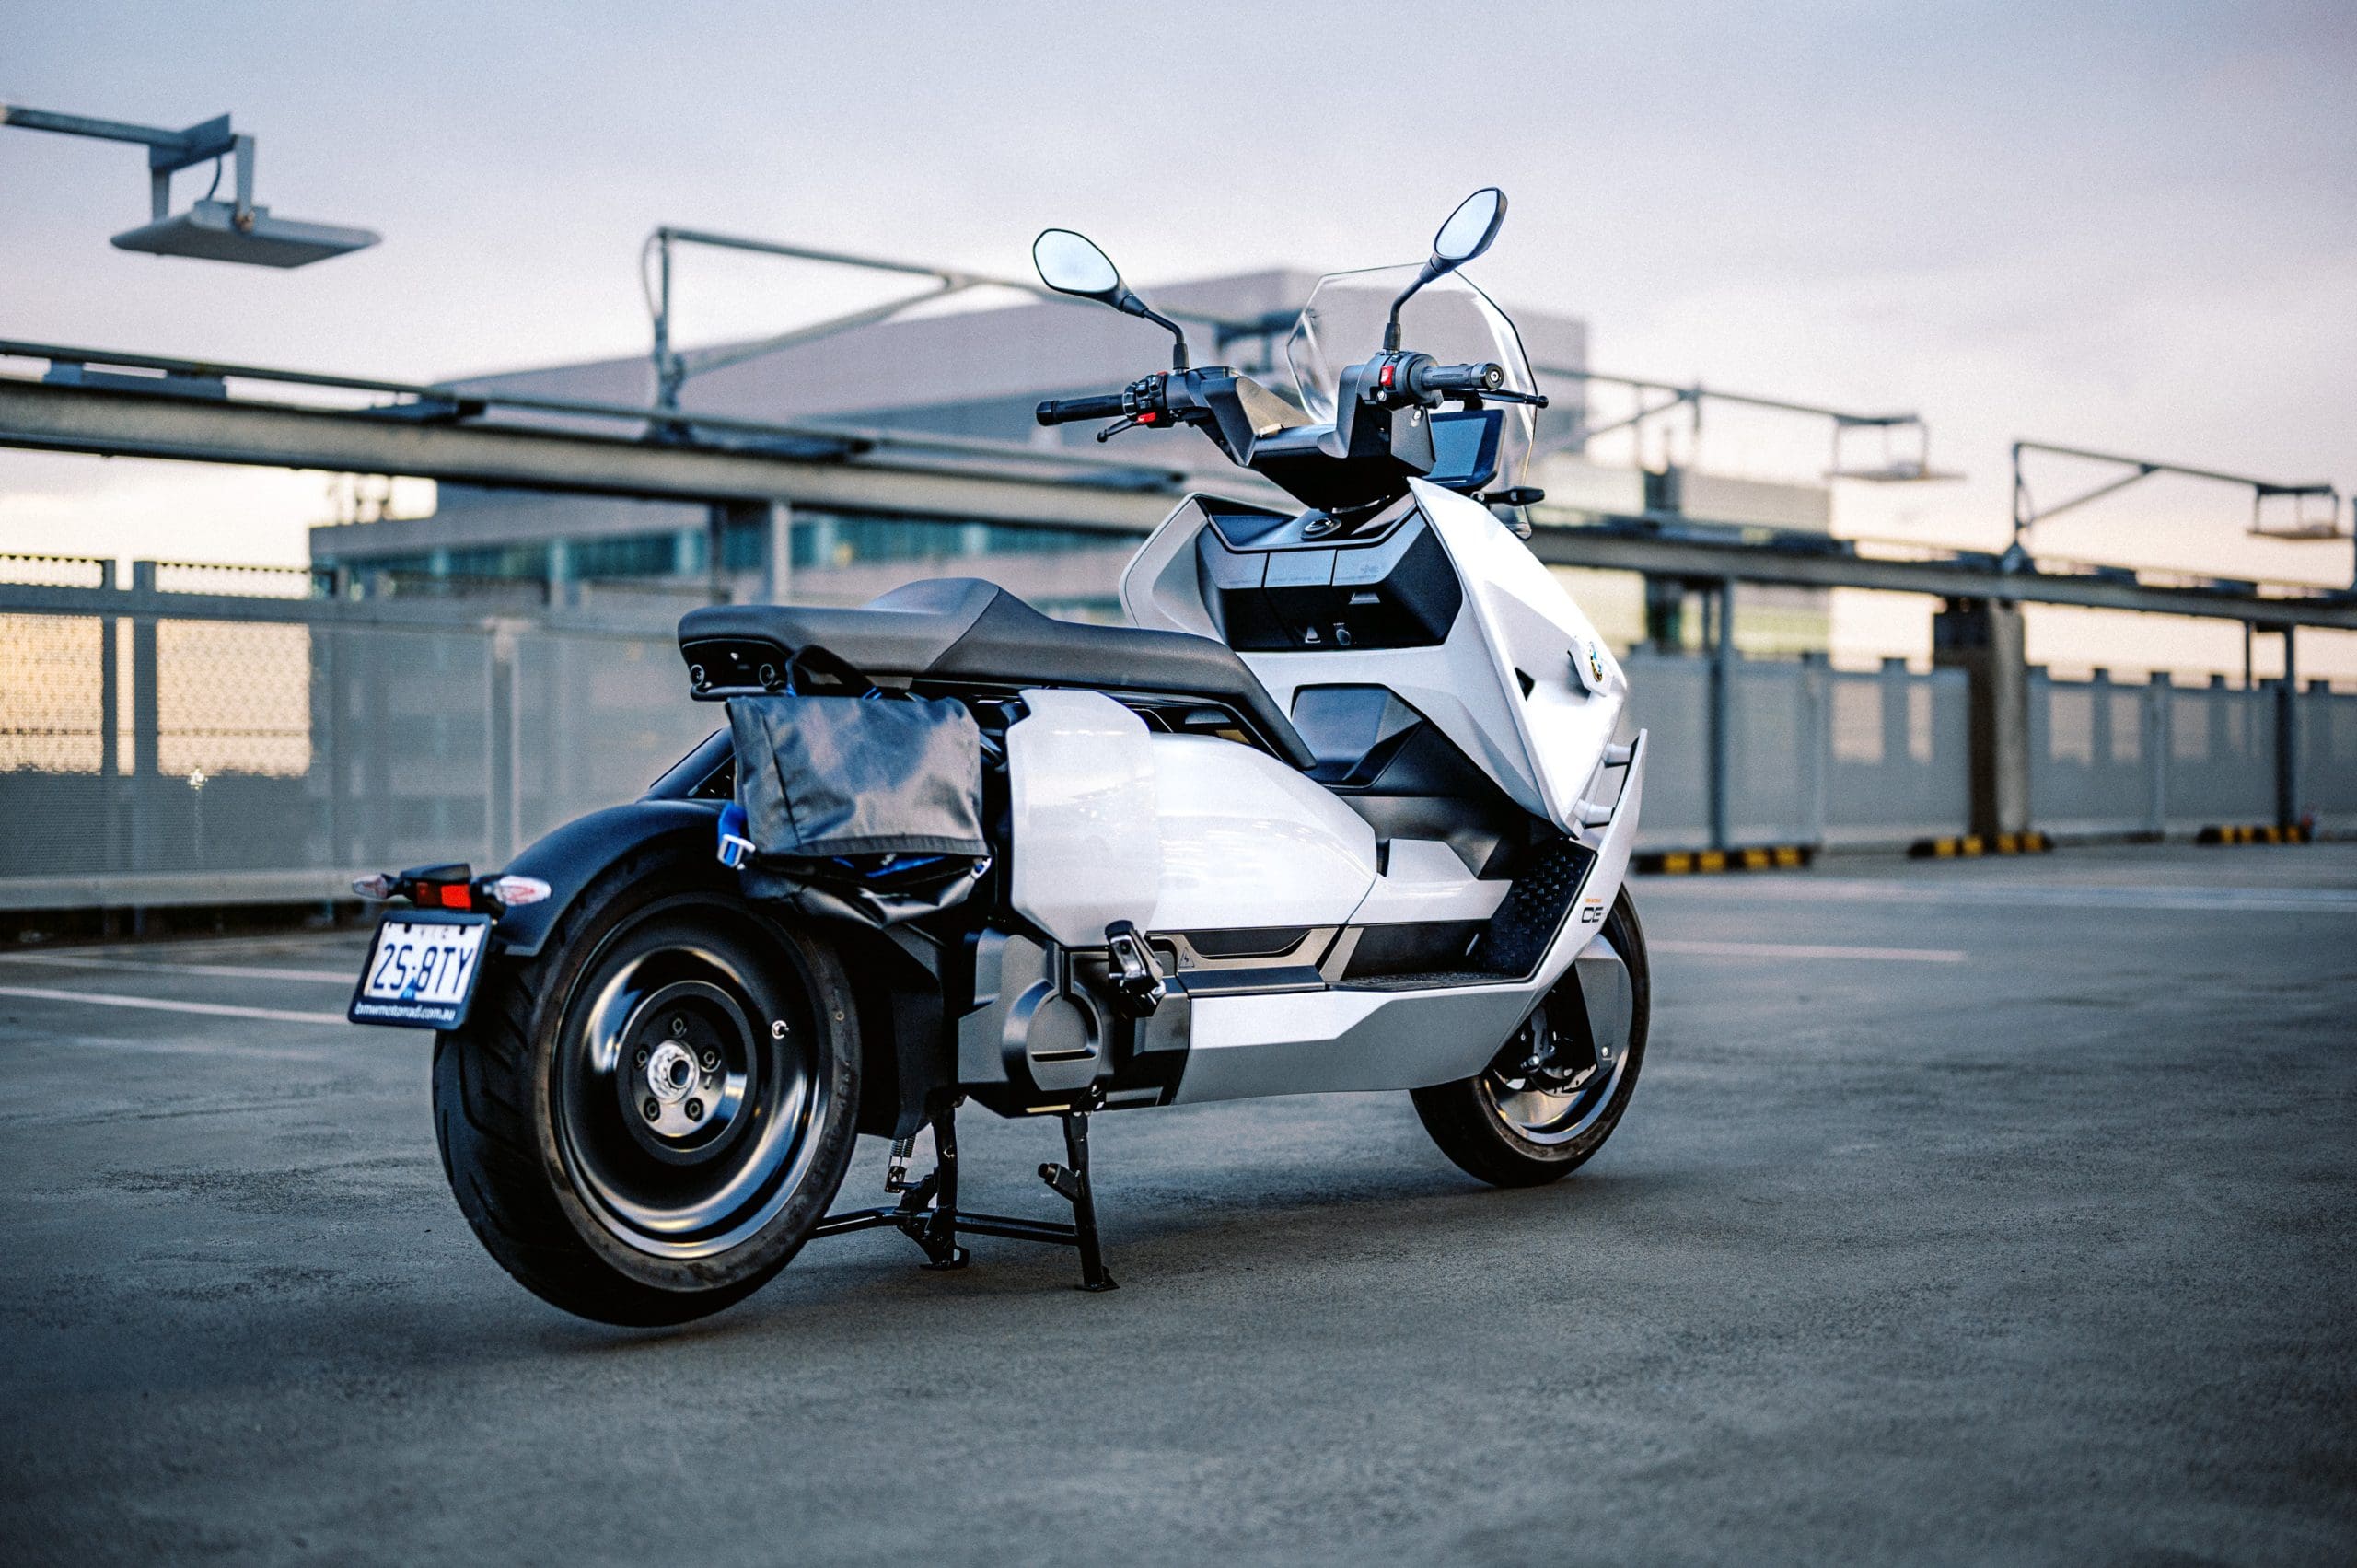 BMW's CE-04 electric scooter on a carpark rooftop at sunset